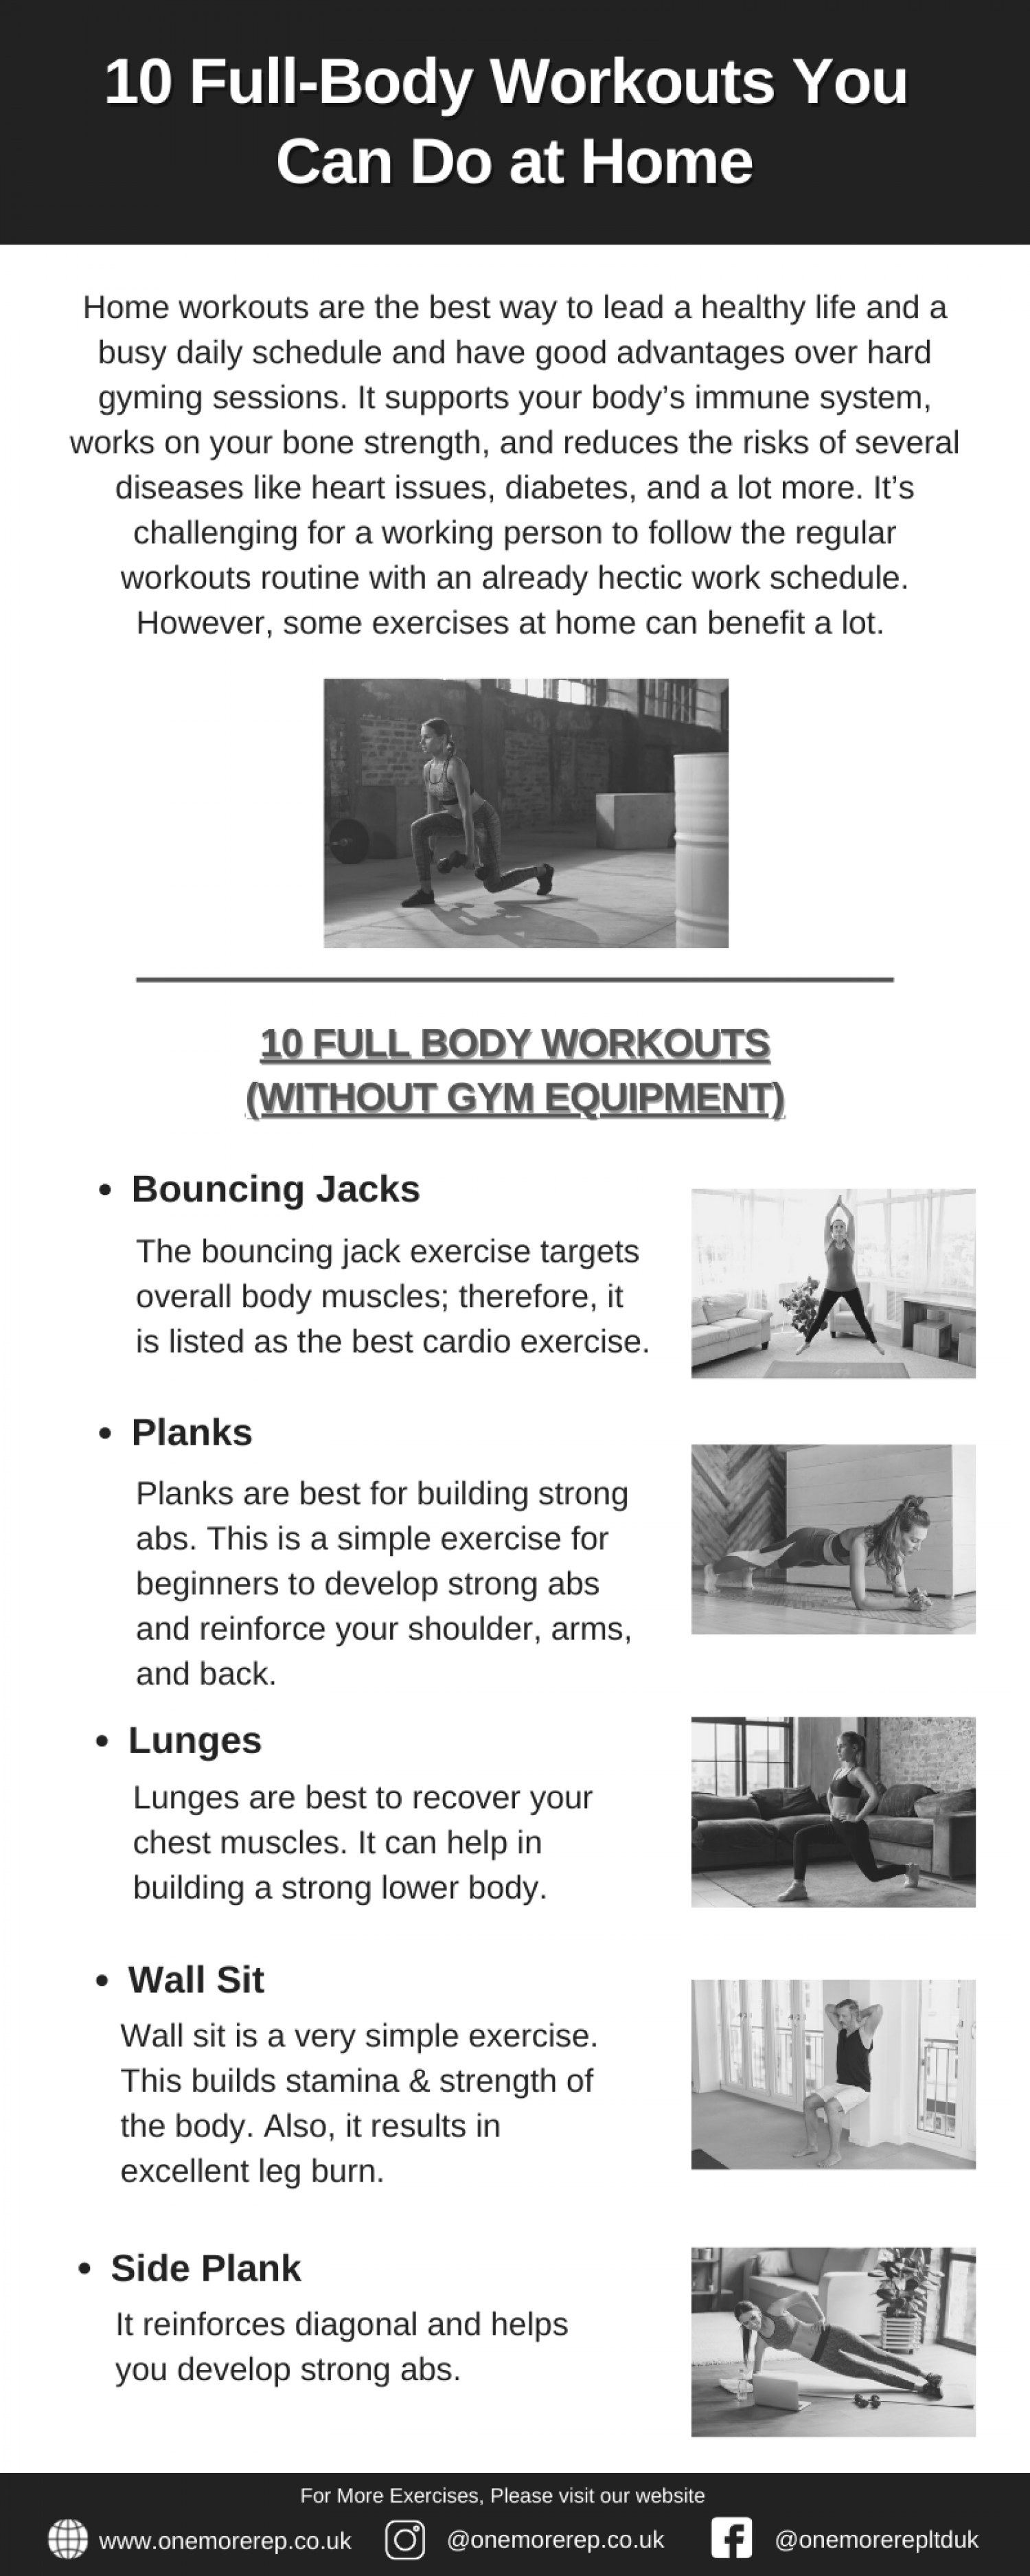 10 Full Body Workouts You Can Do at Home Infographic